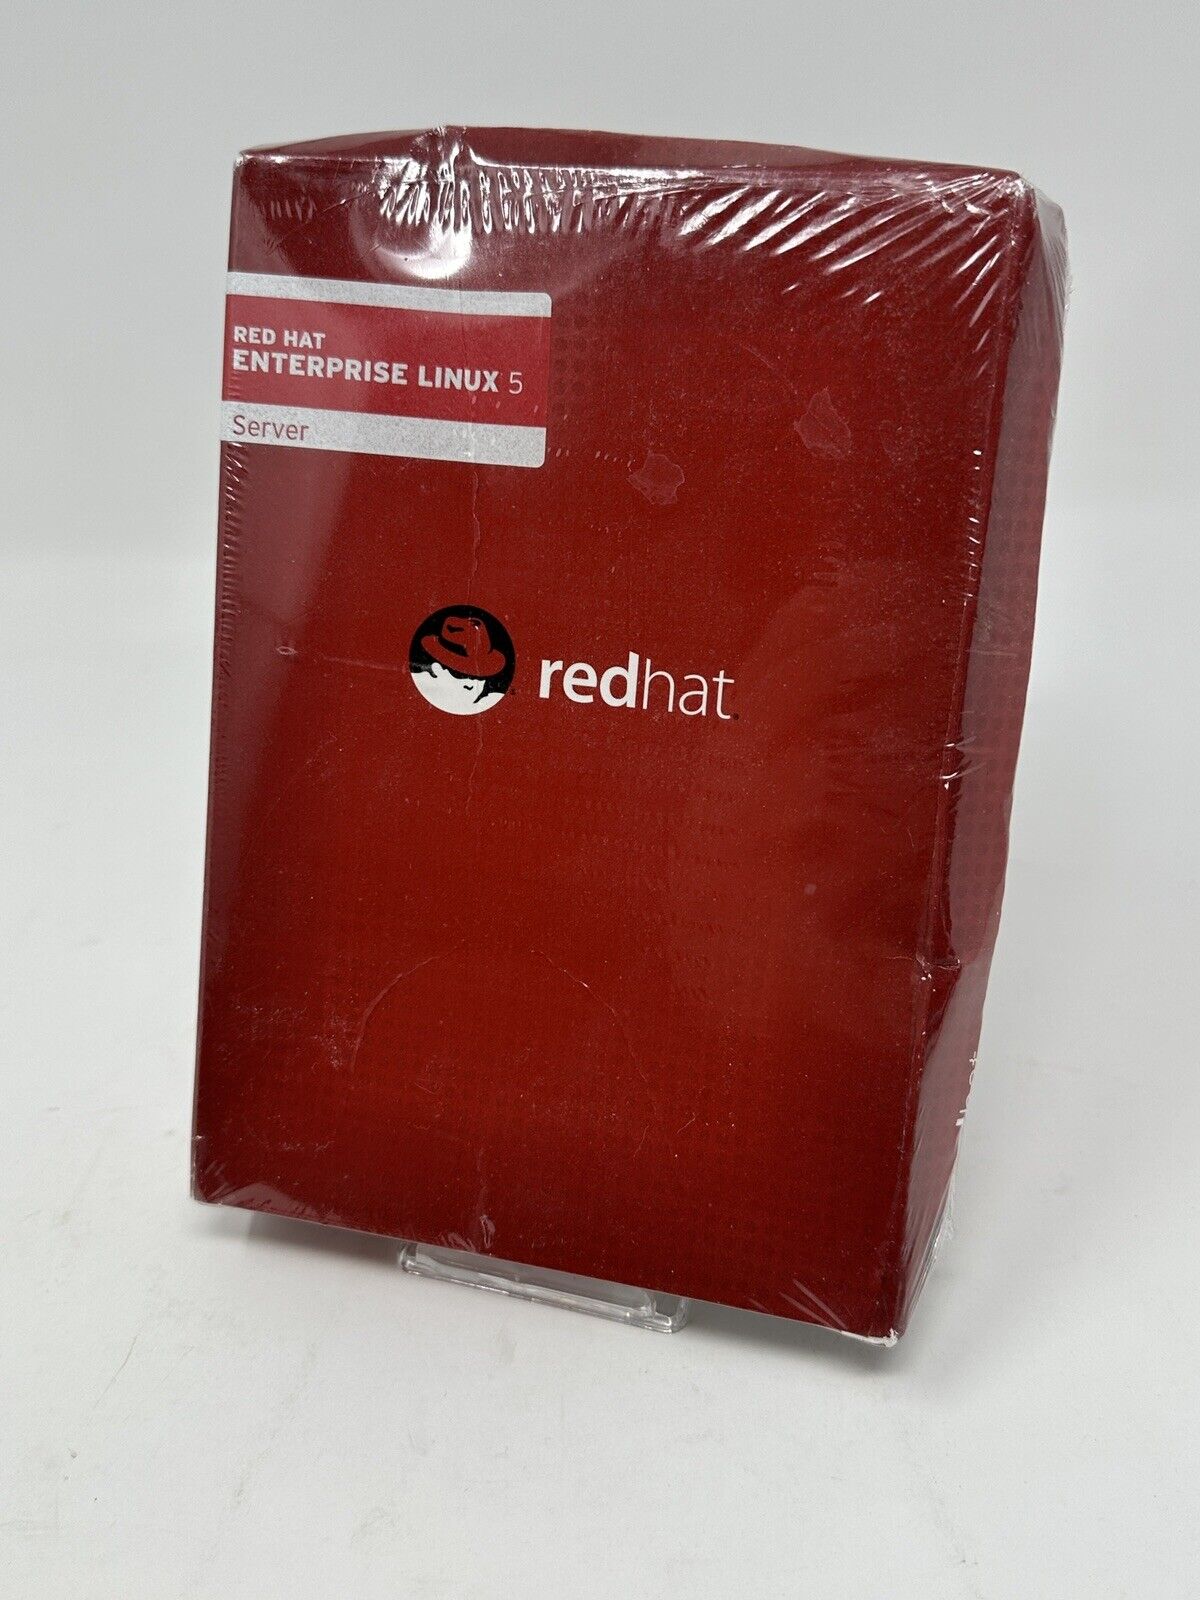 Red Hat Enterprise Linux 5 Server - New and Sealed - Box Damage See Pics